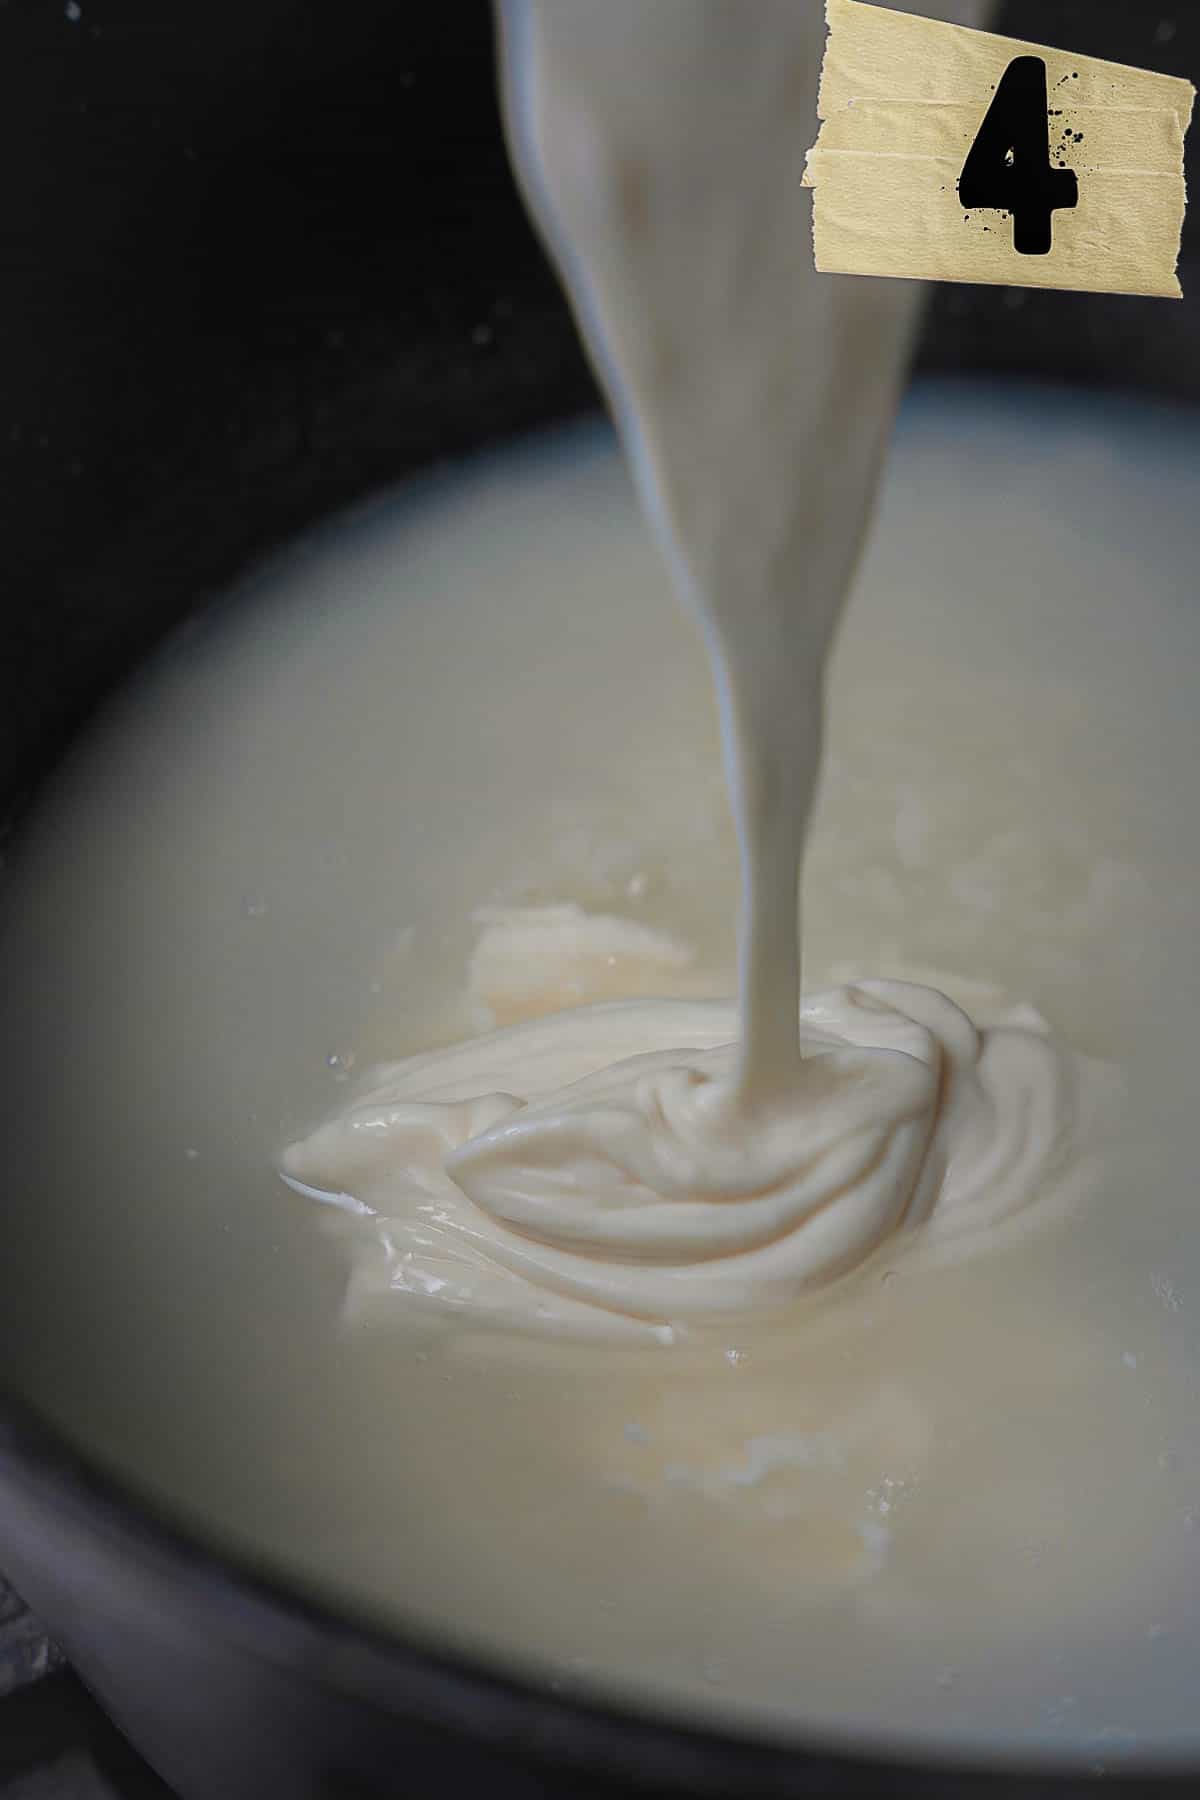 The yogurt mixture is slowly mixed into the cooked rice and water in a dark colored pot.